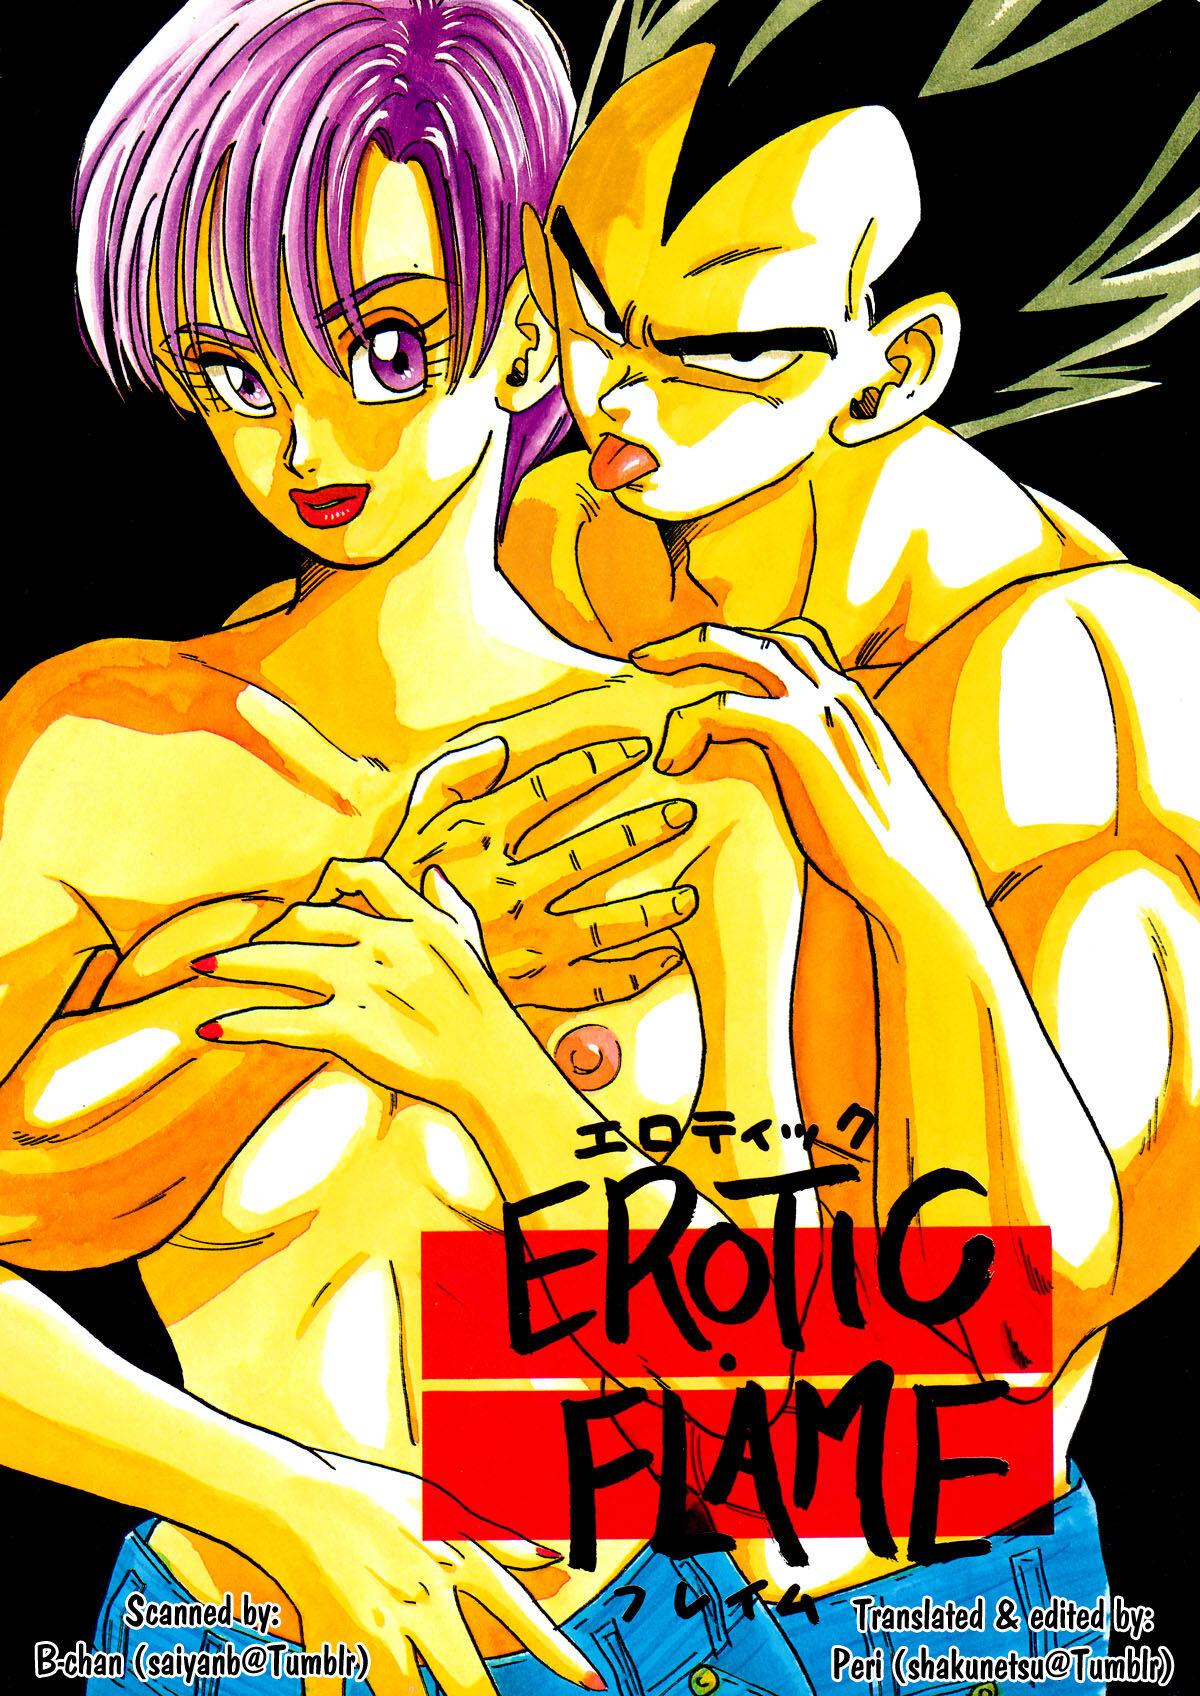 Celebrity Nudes E Flame - Dragon ball Argentina - Picture 1